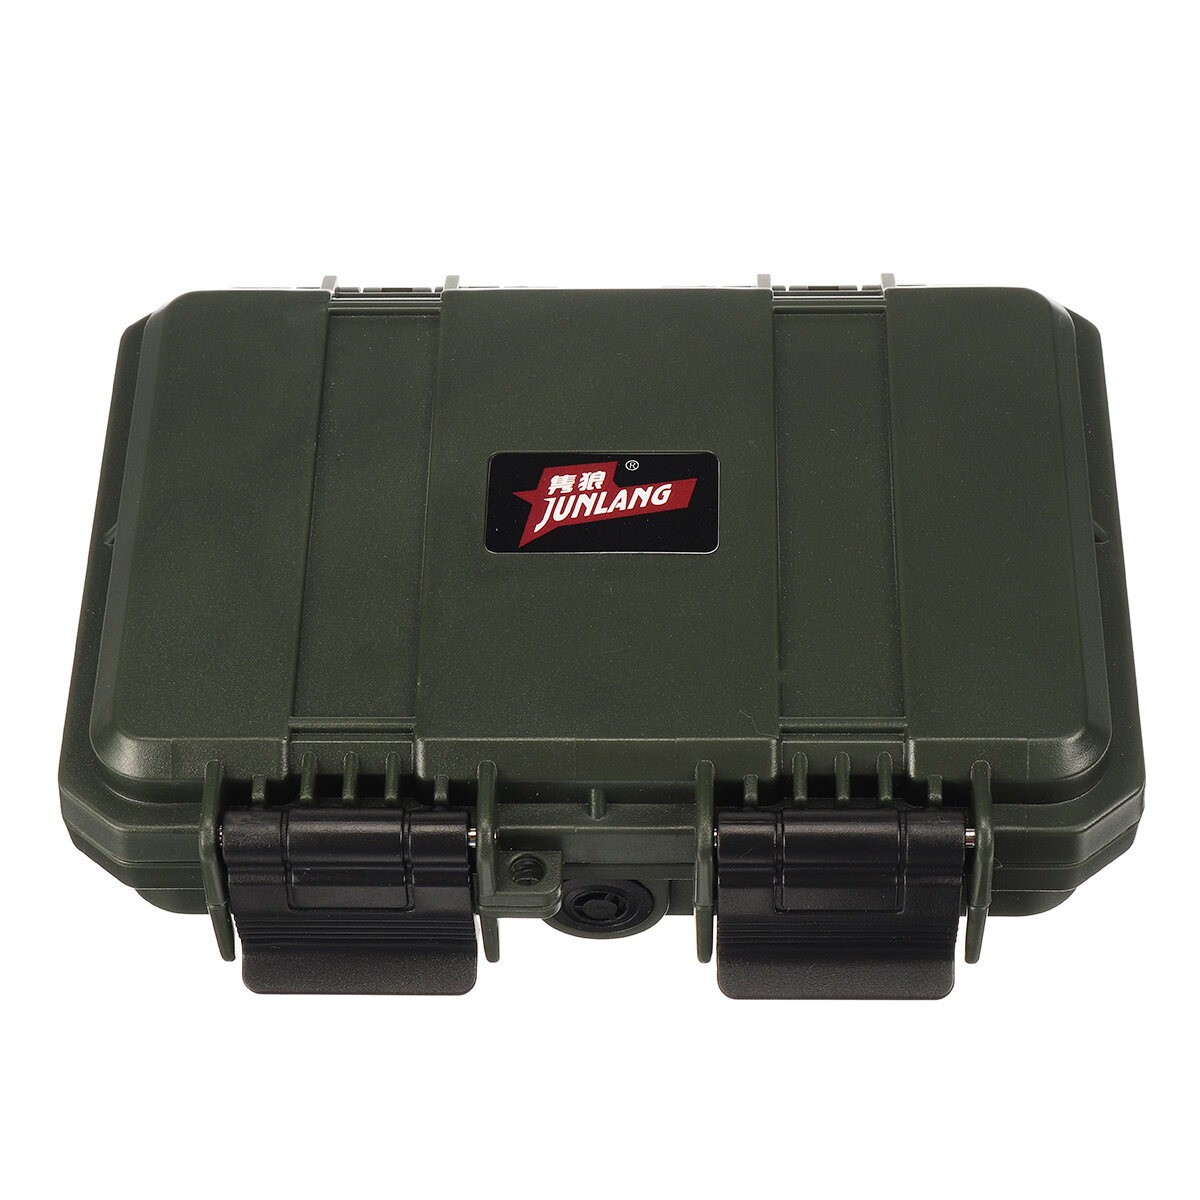 Shockproof Sealed Safety Case toolbox Airtight waterproof tool box Instrument case Dry Box with pre-